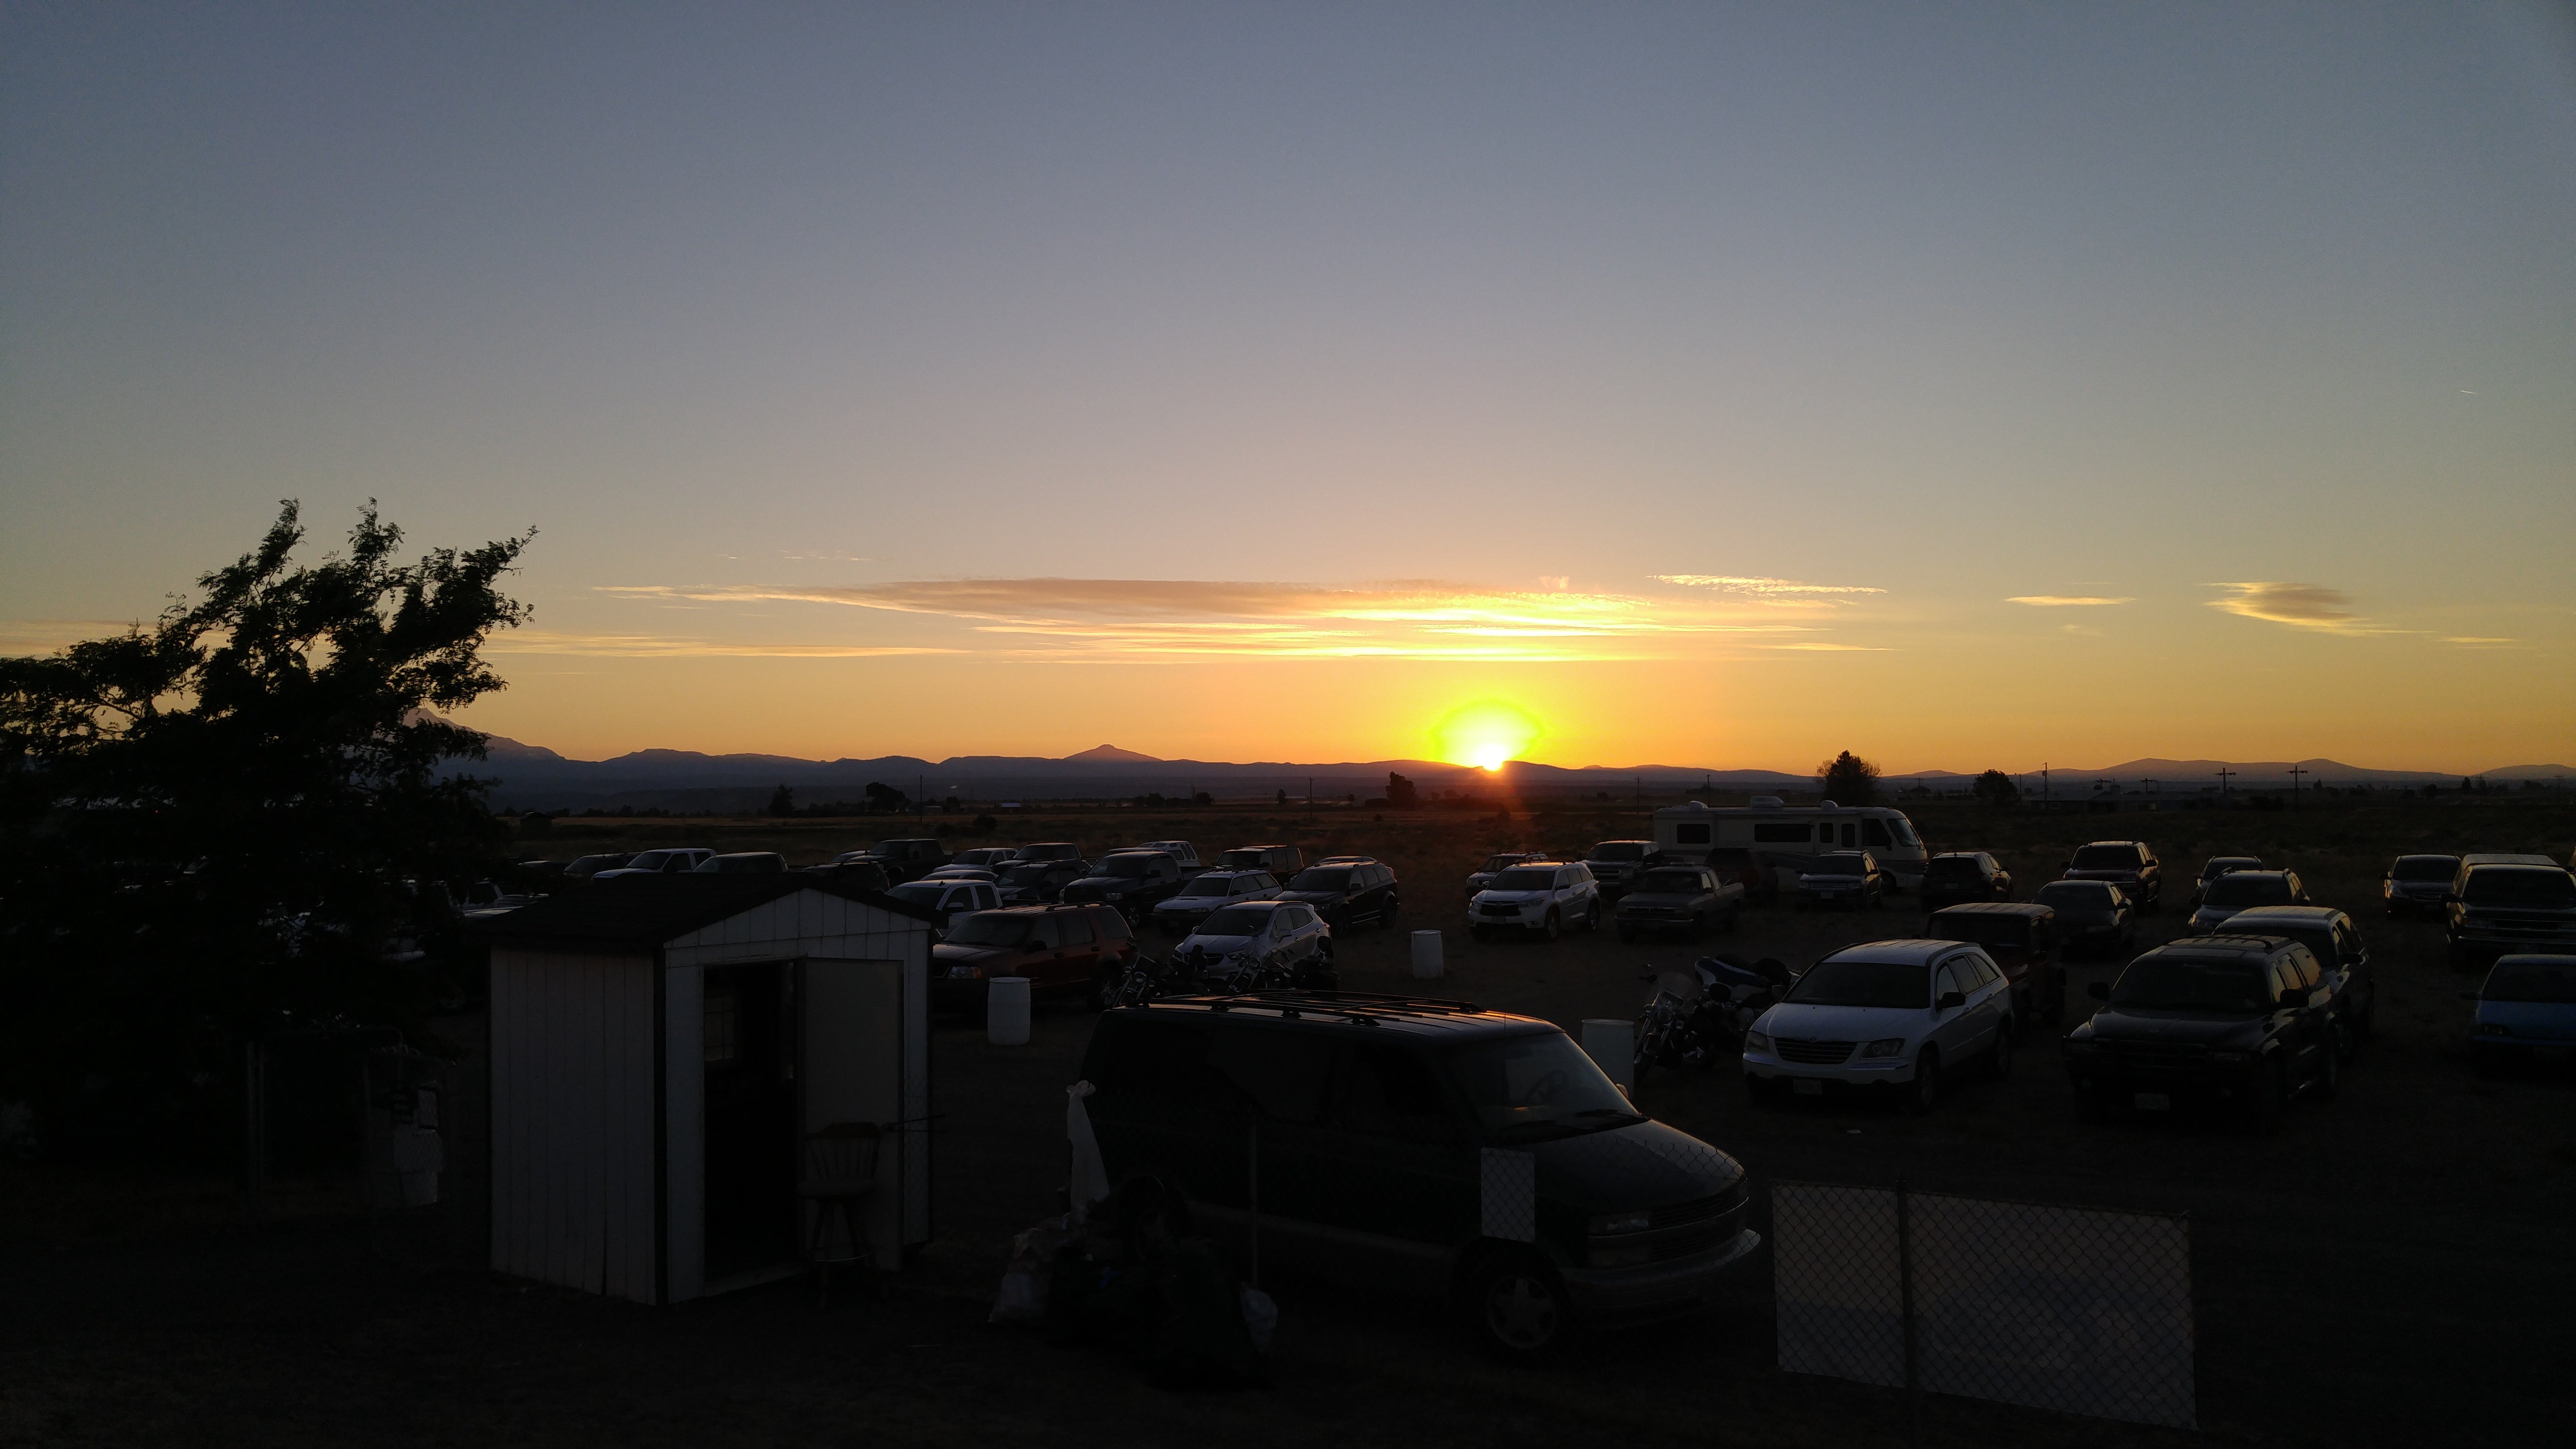 Amazing sunset. Parking lot and where you can camp overnight